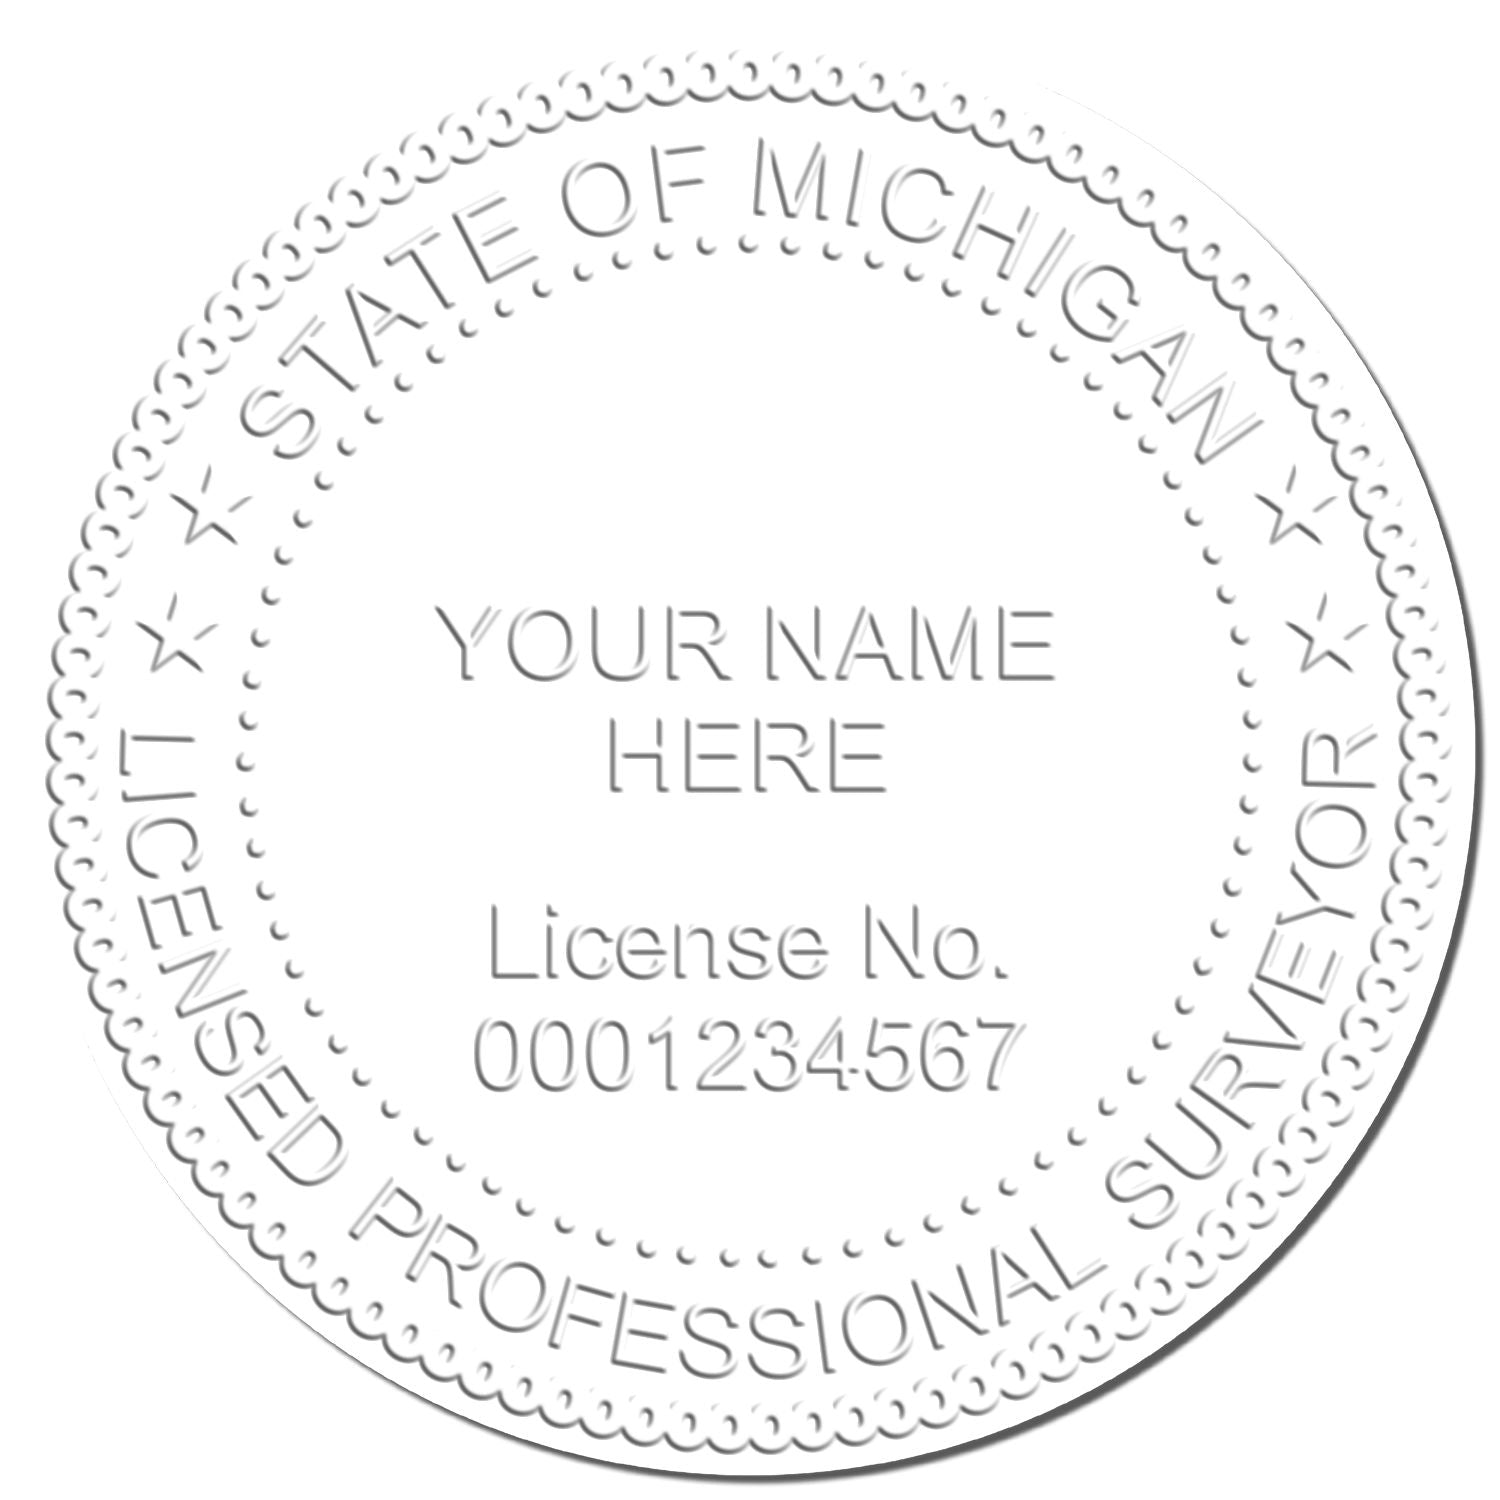 This paper is stamped with a sample imprint of the Michigan Desk Surveyor Seal Embosser, signifying its quality and reliability.